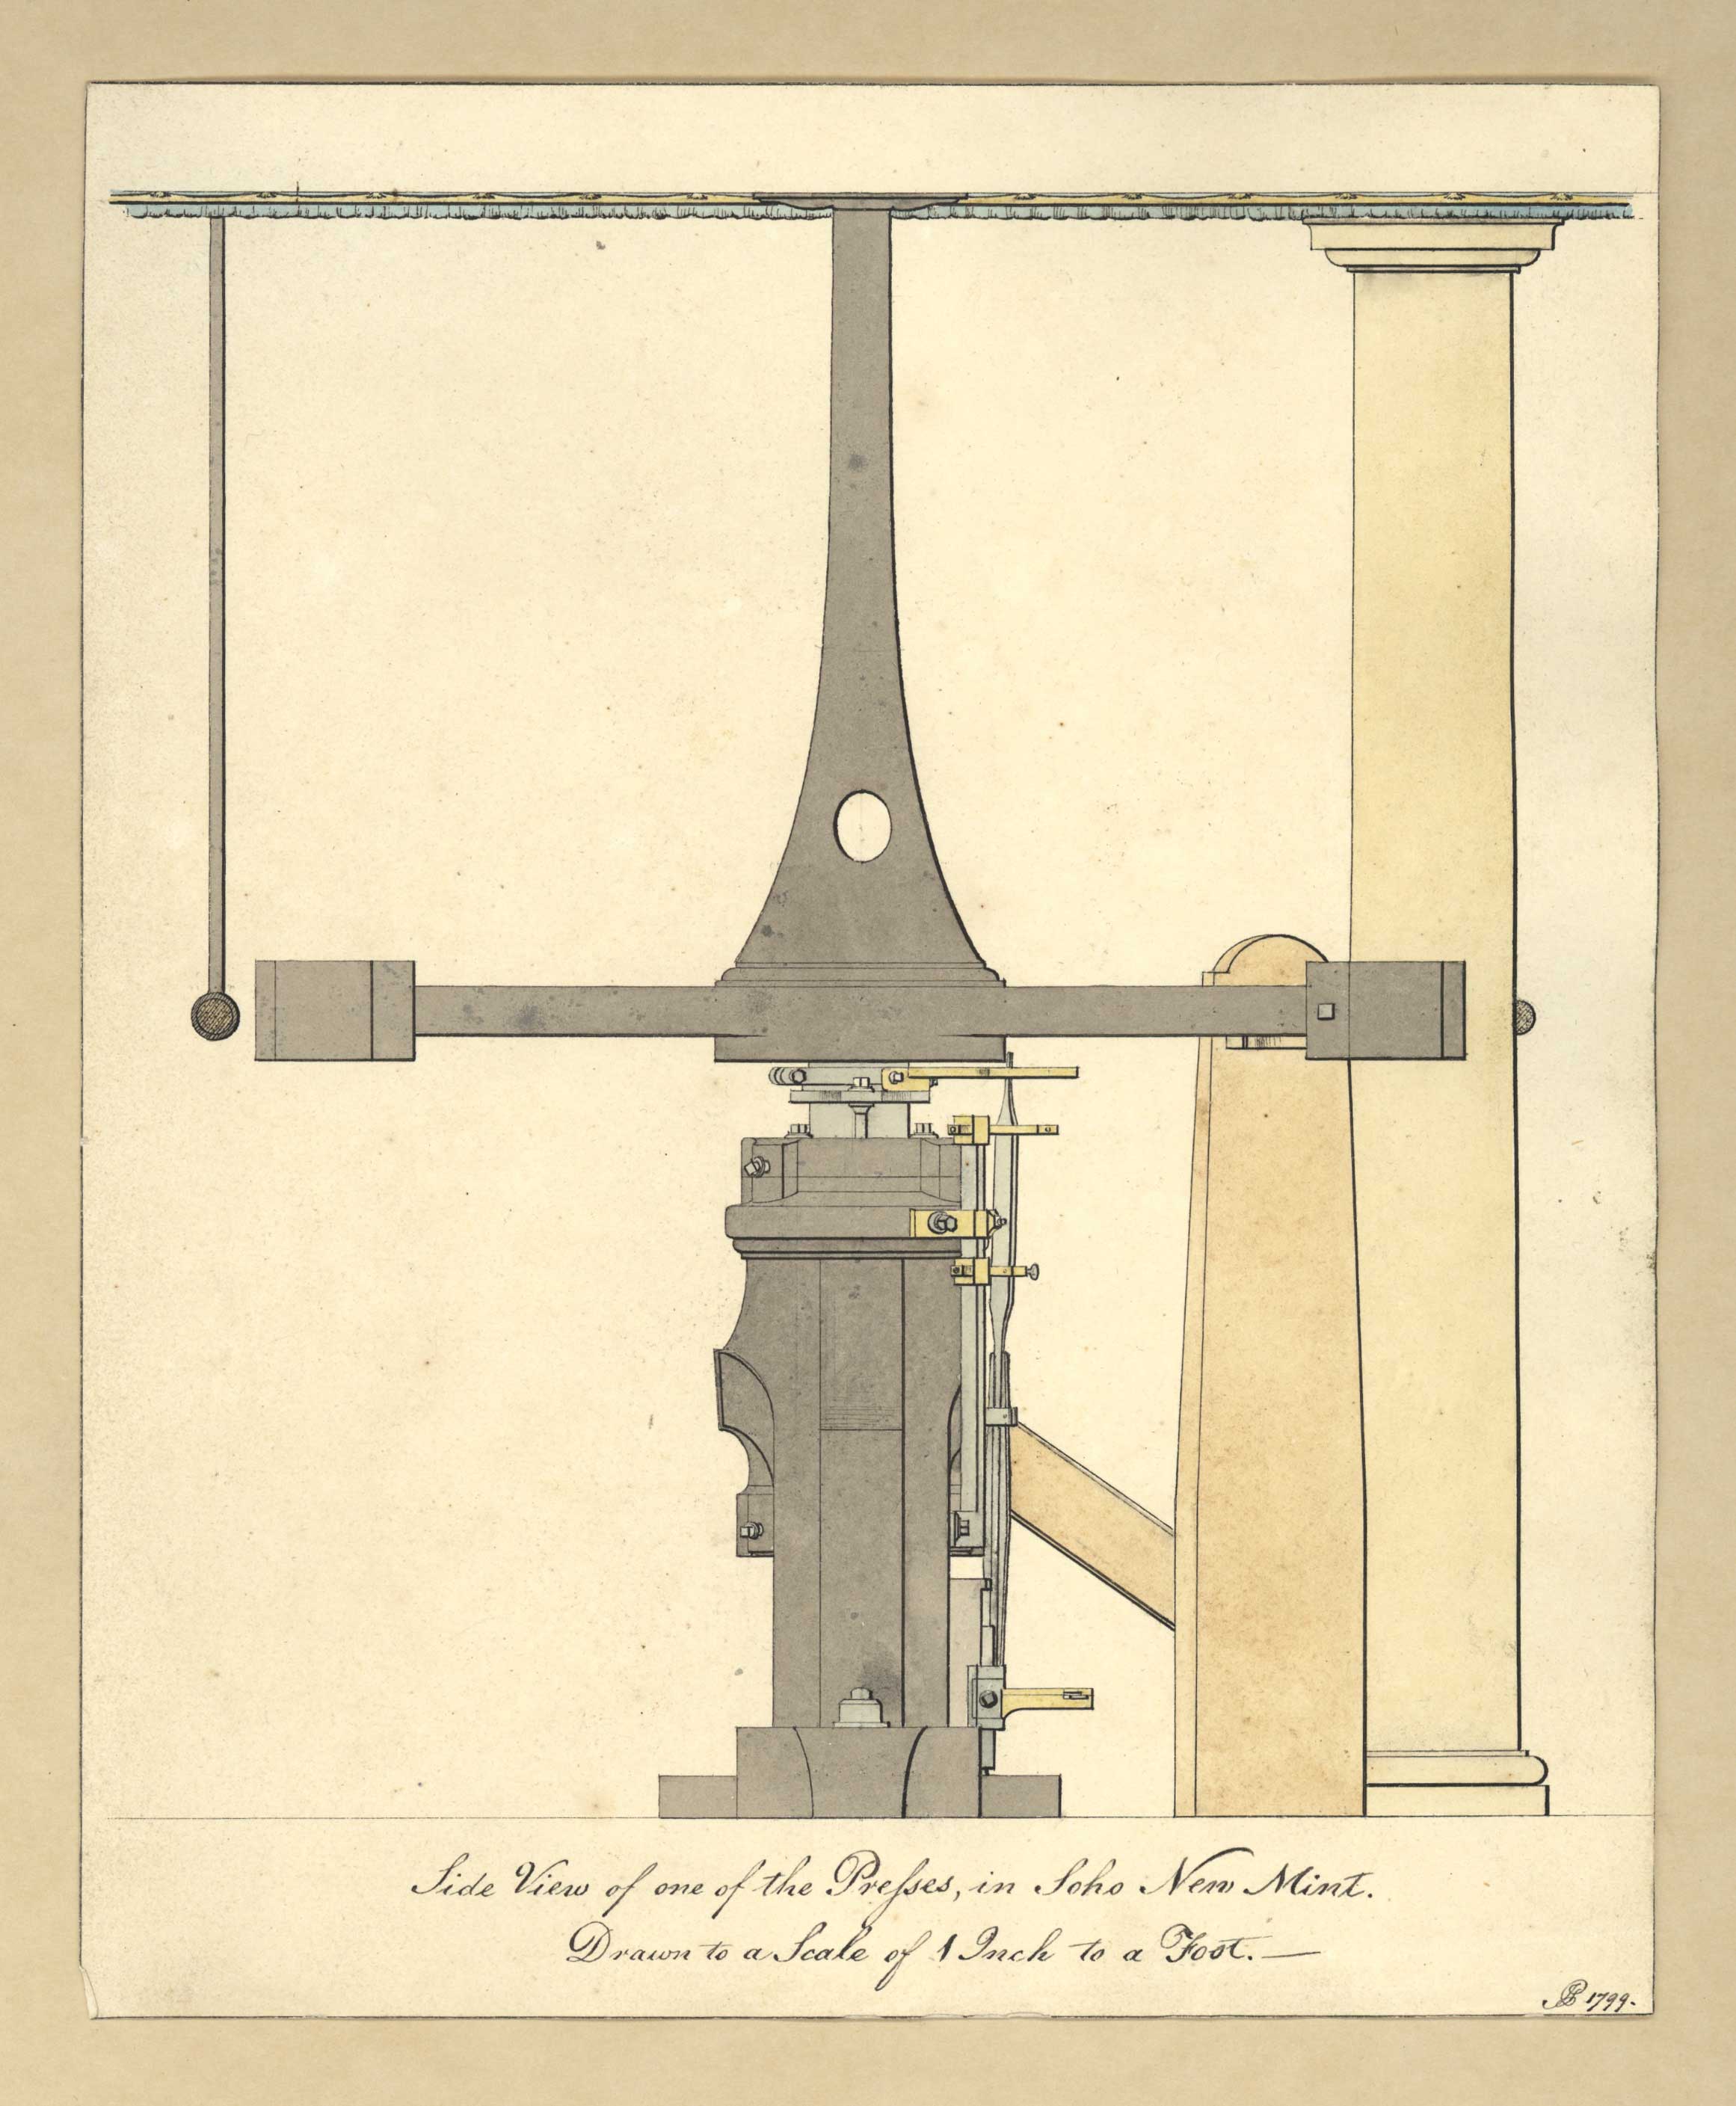 Side elevation of a coining press with the trumpet above